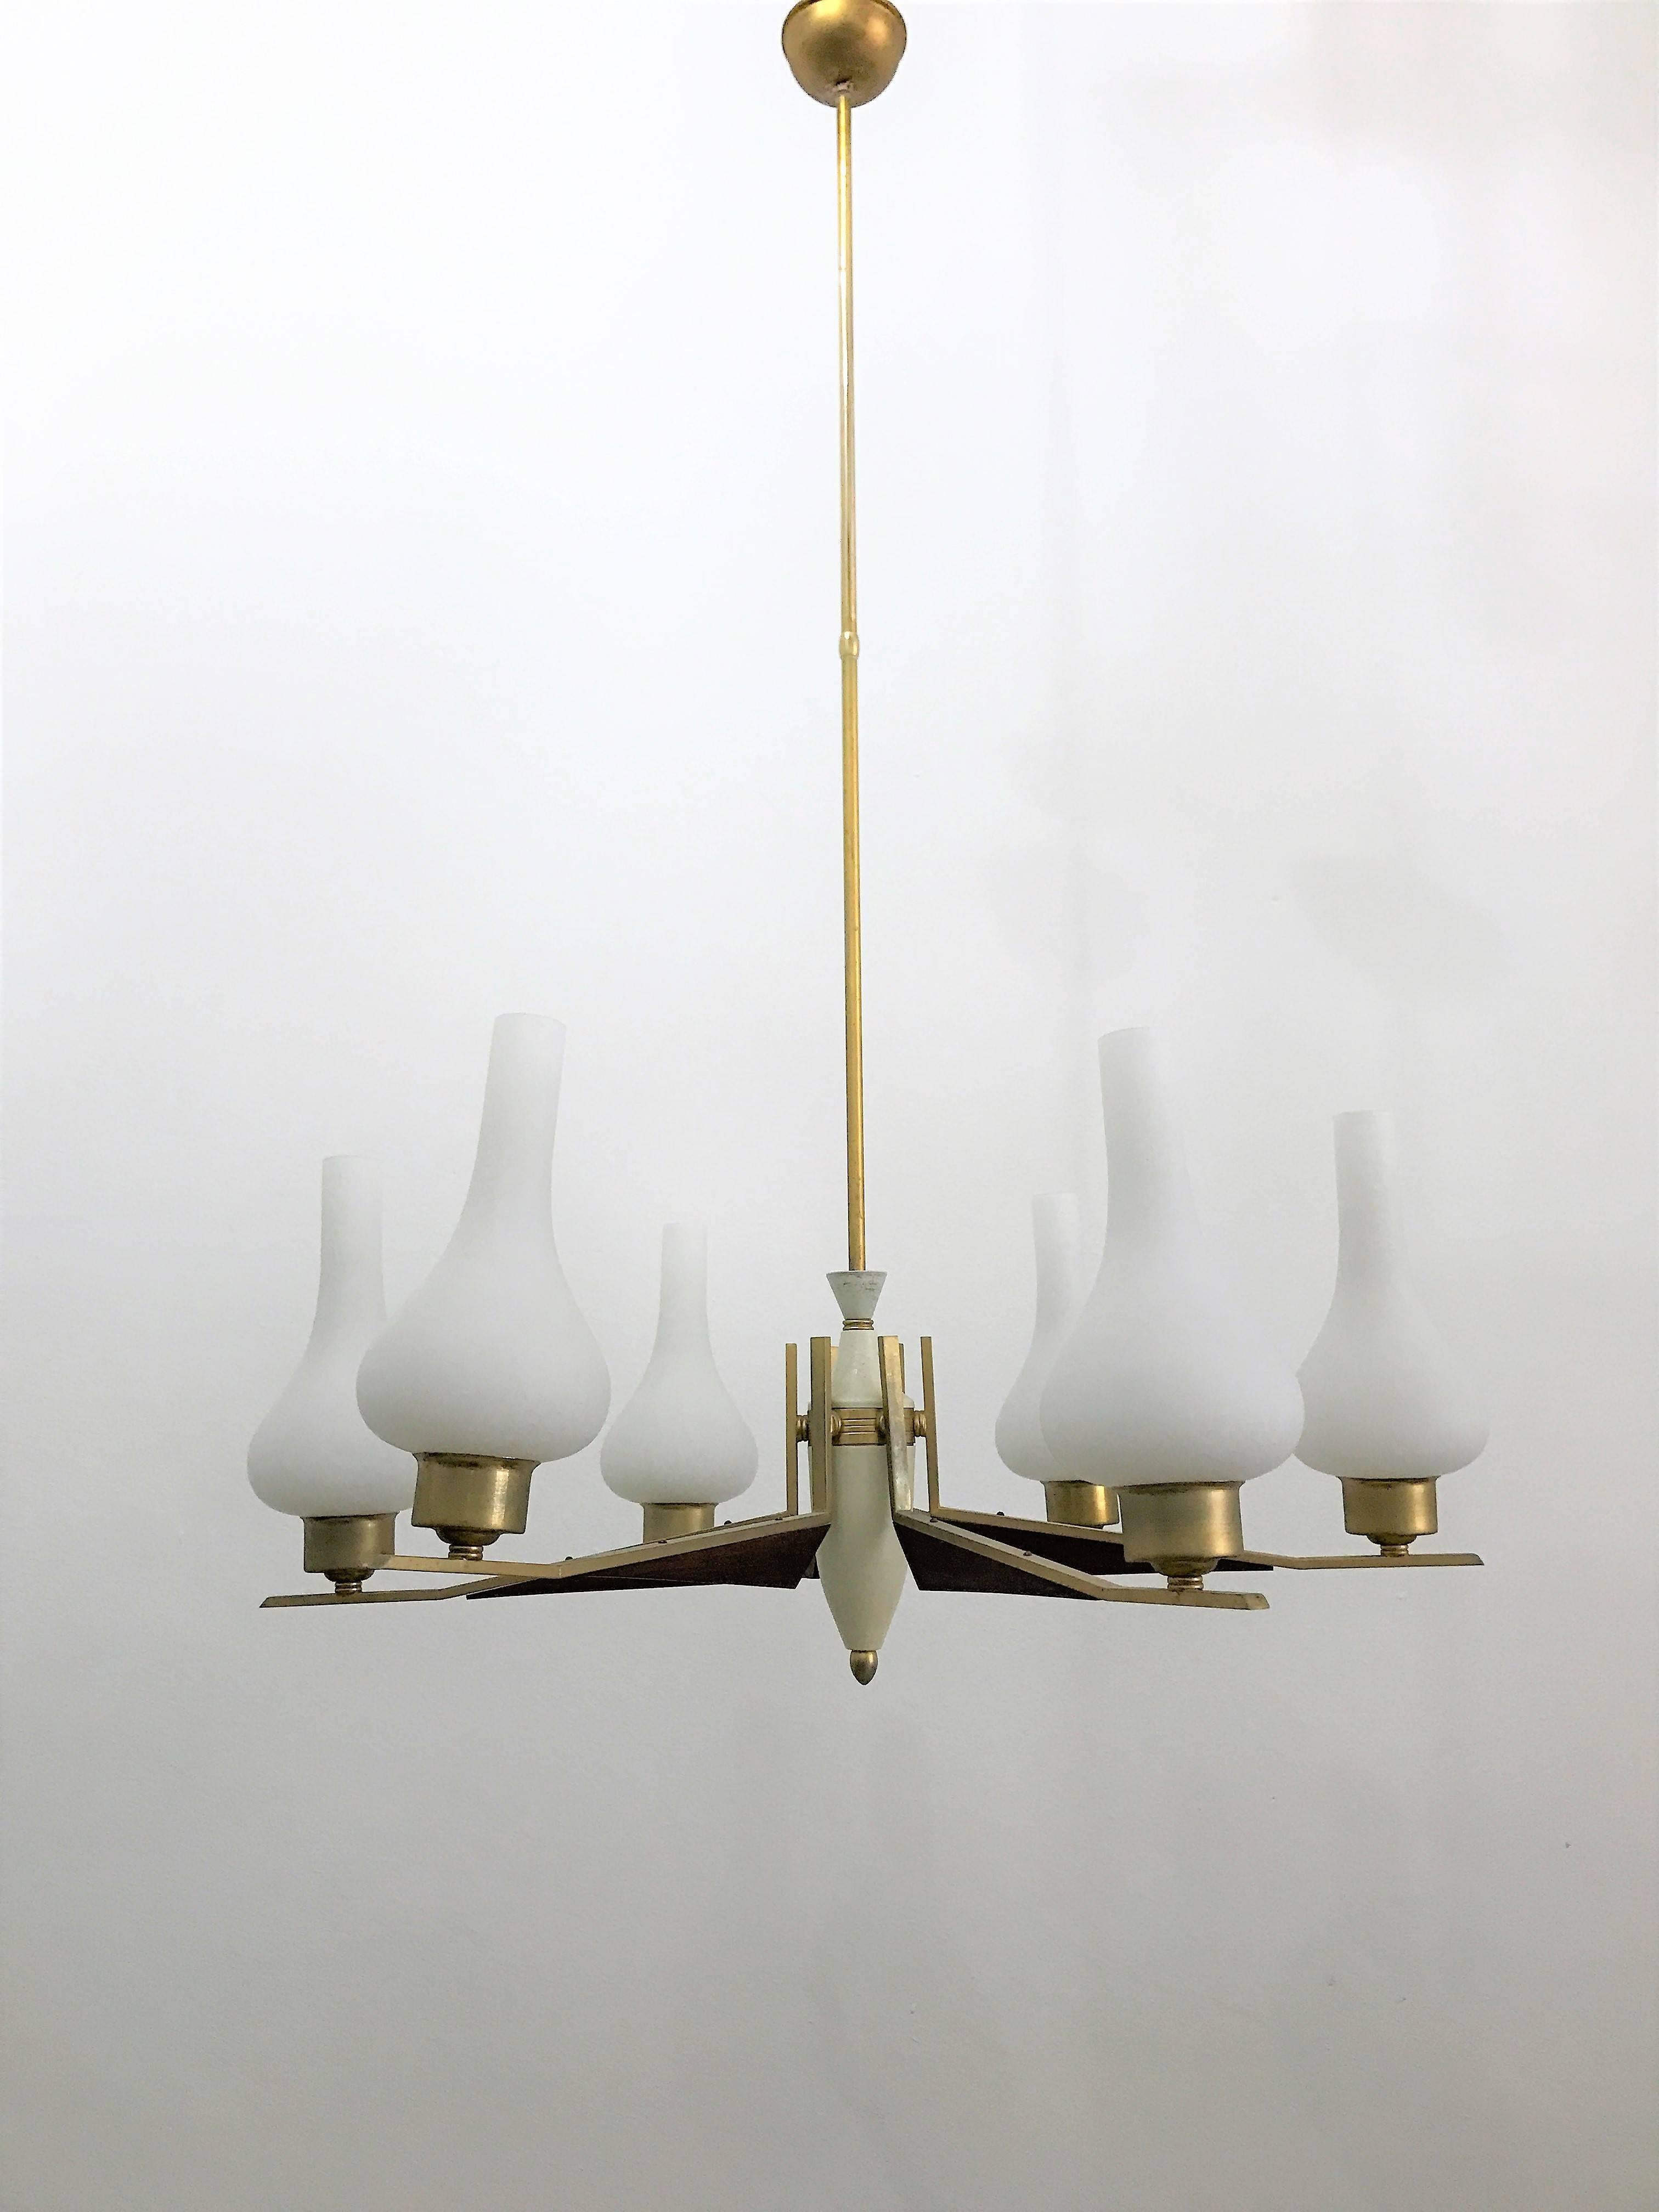 Danish style chandelier attributed to Stilnovo made in the 20th century. The rod that supports it has brass while the arms are in brass or walnut, and the bowls, the elegant form, they are created by hand in opaline glass.